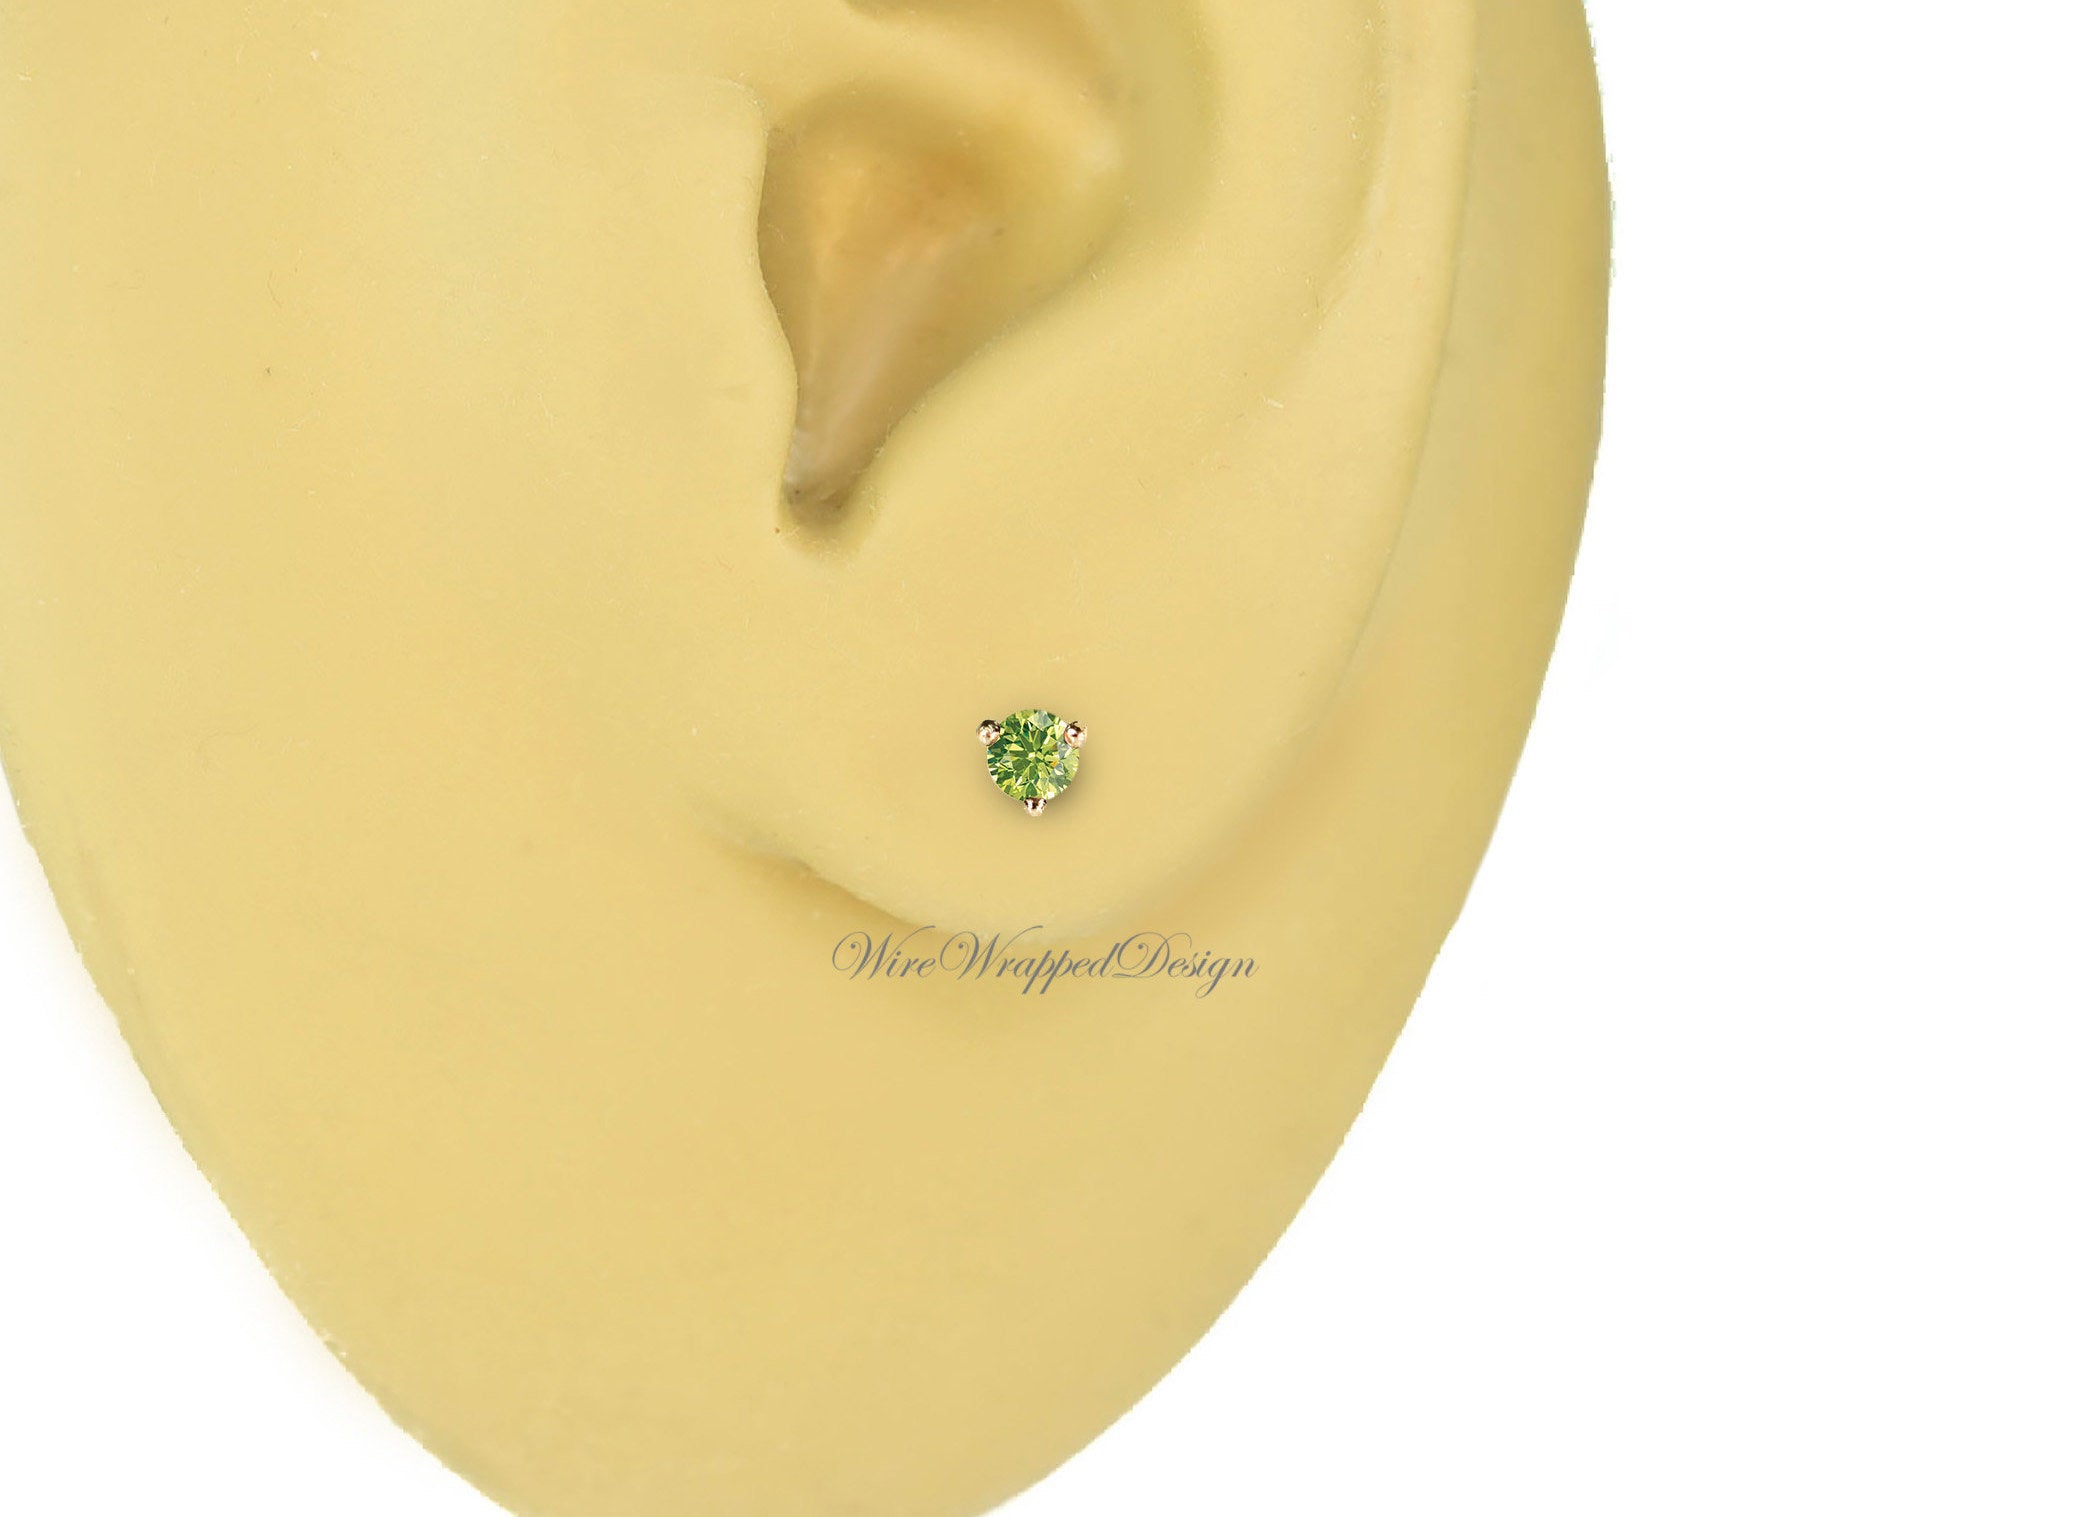 PAIR Genuine GREEN DIAMOND Earrings Studs 2.5mm 0.12tcw Martini 14k Solid Gold (Yellow, Rose, White) Platinum, Silver Cartilage Helix Tragus